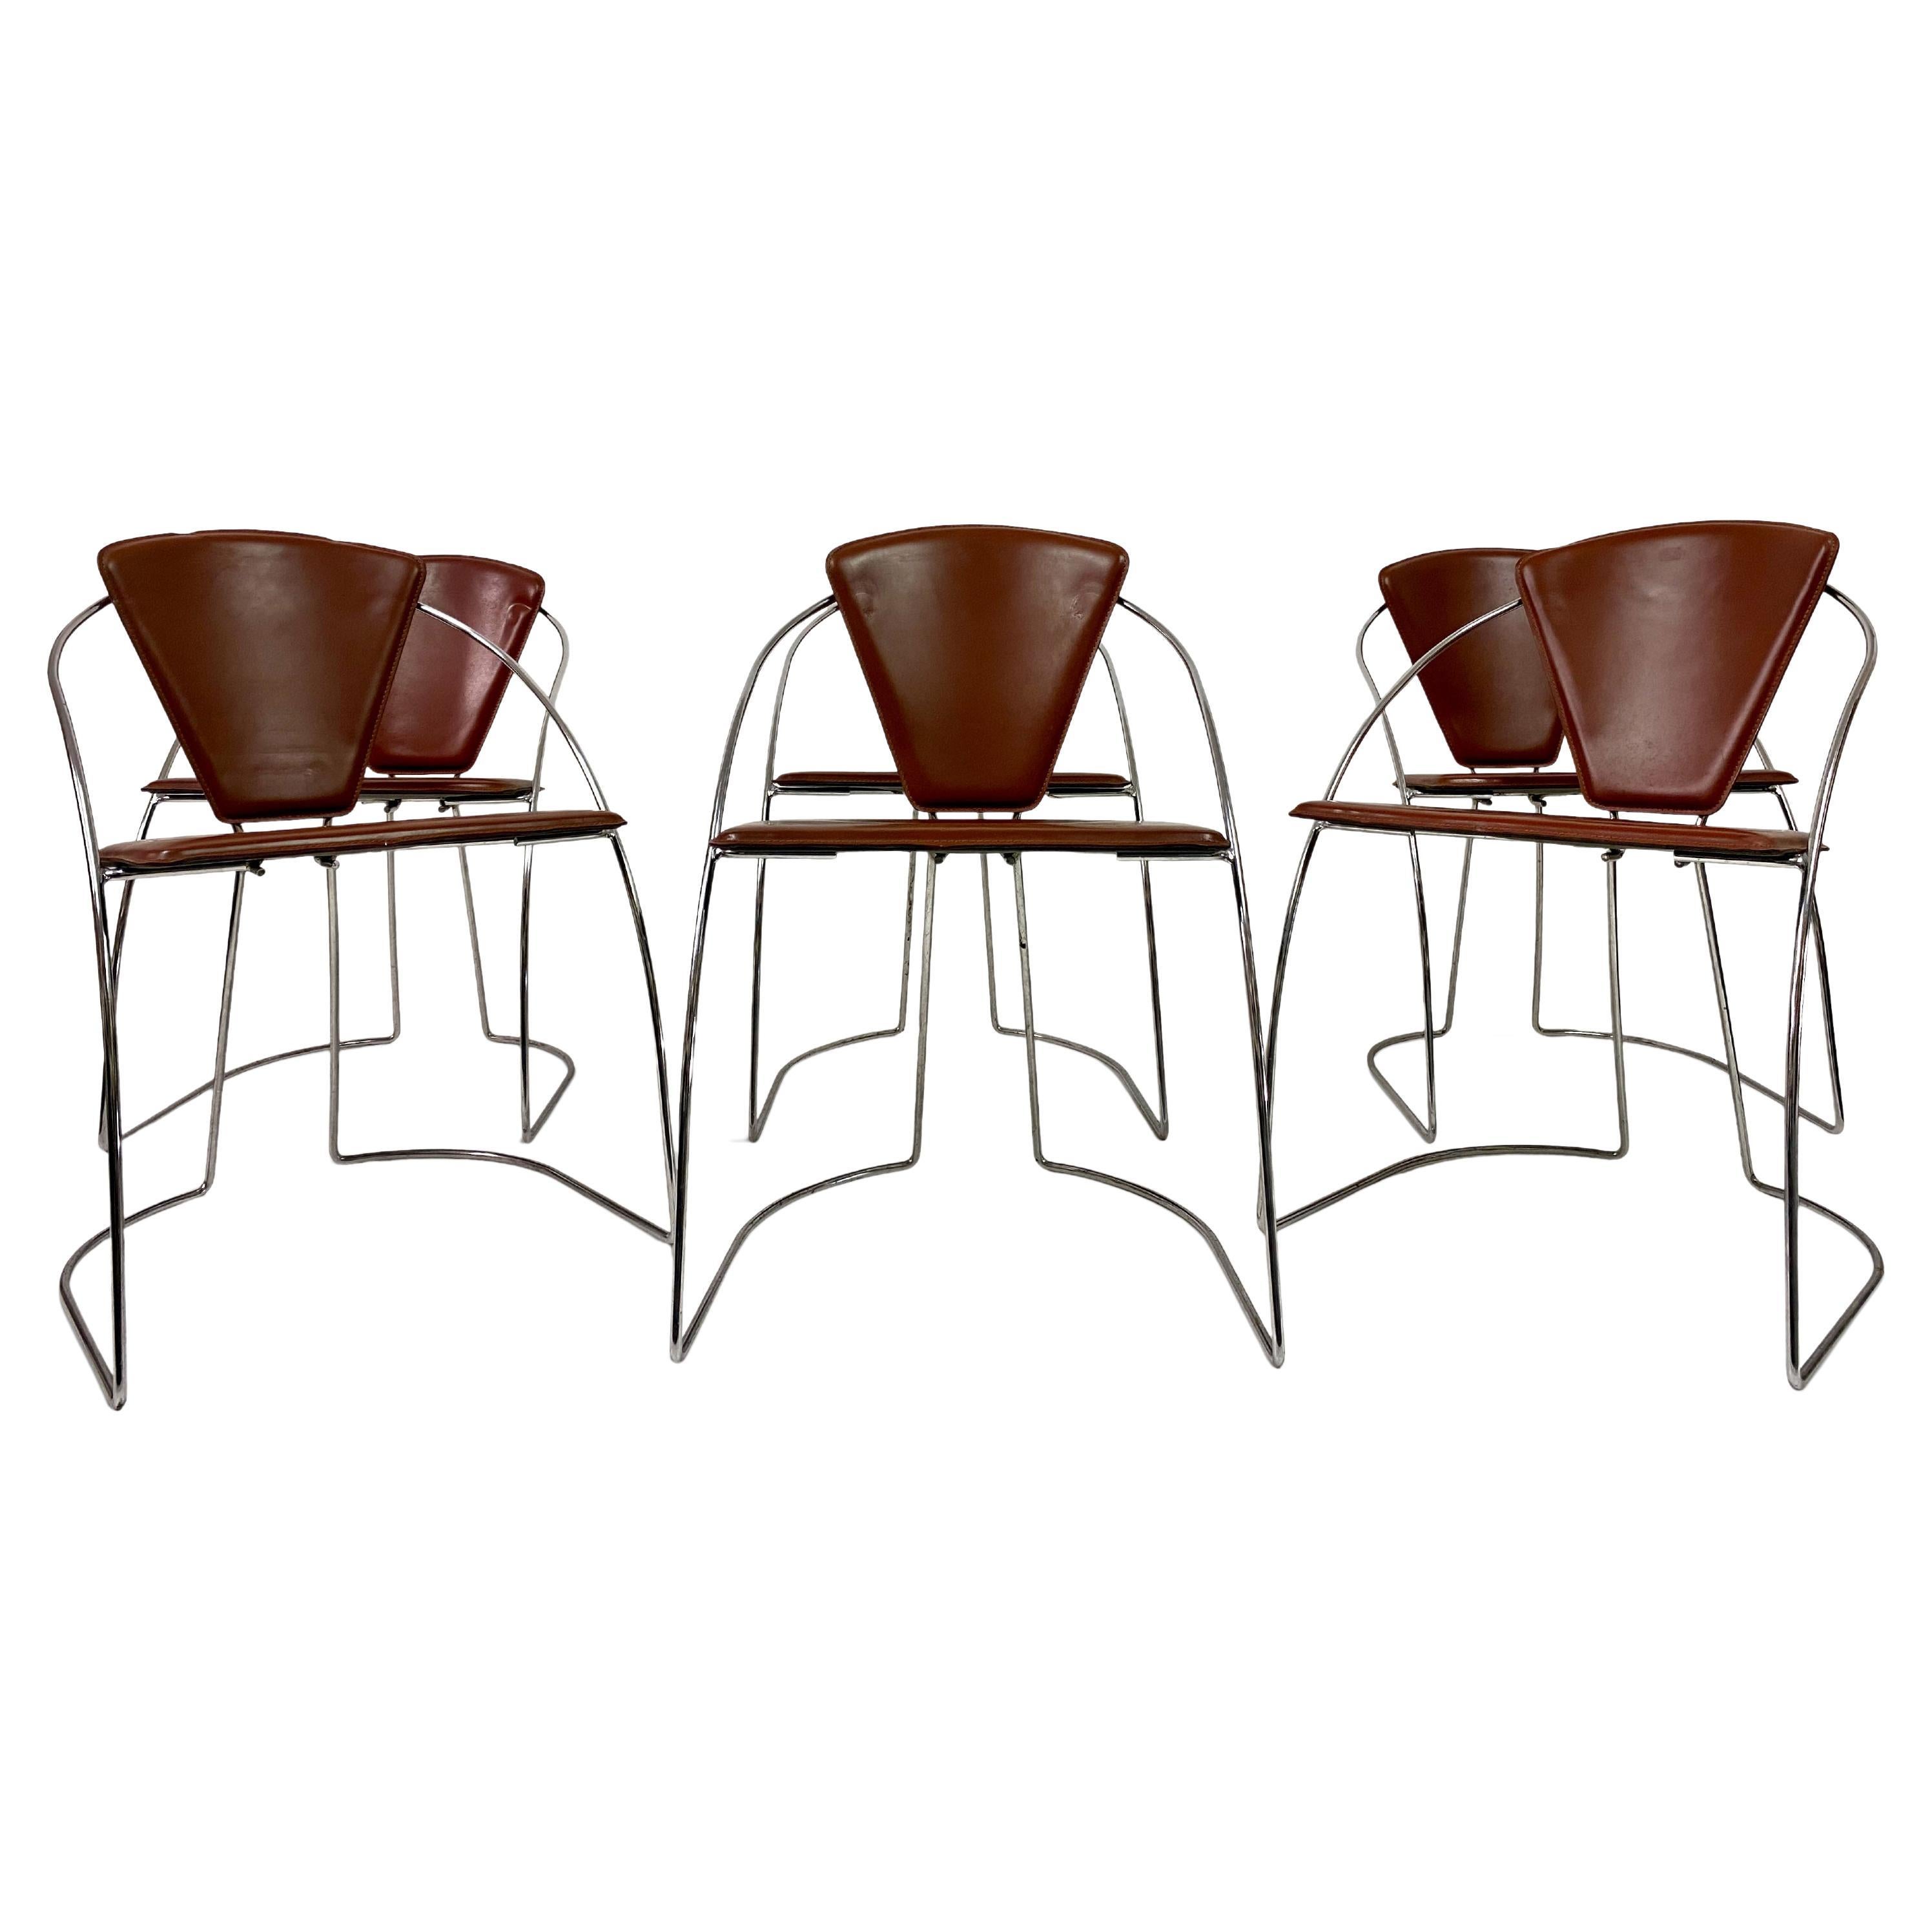 Set of Six Italian Chrome Leather Dining Chairs